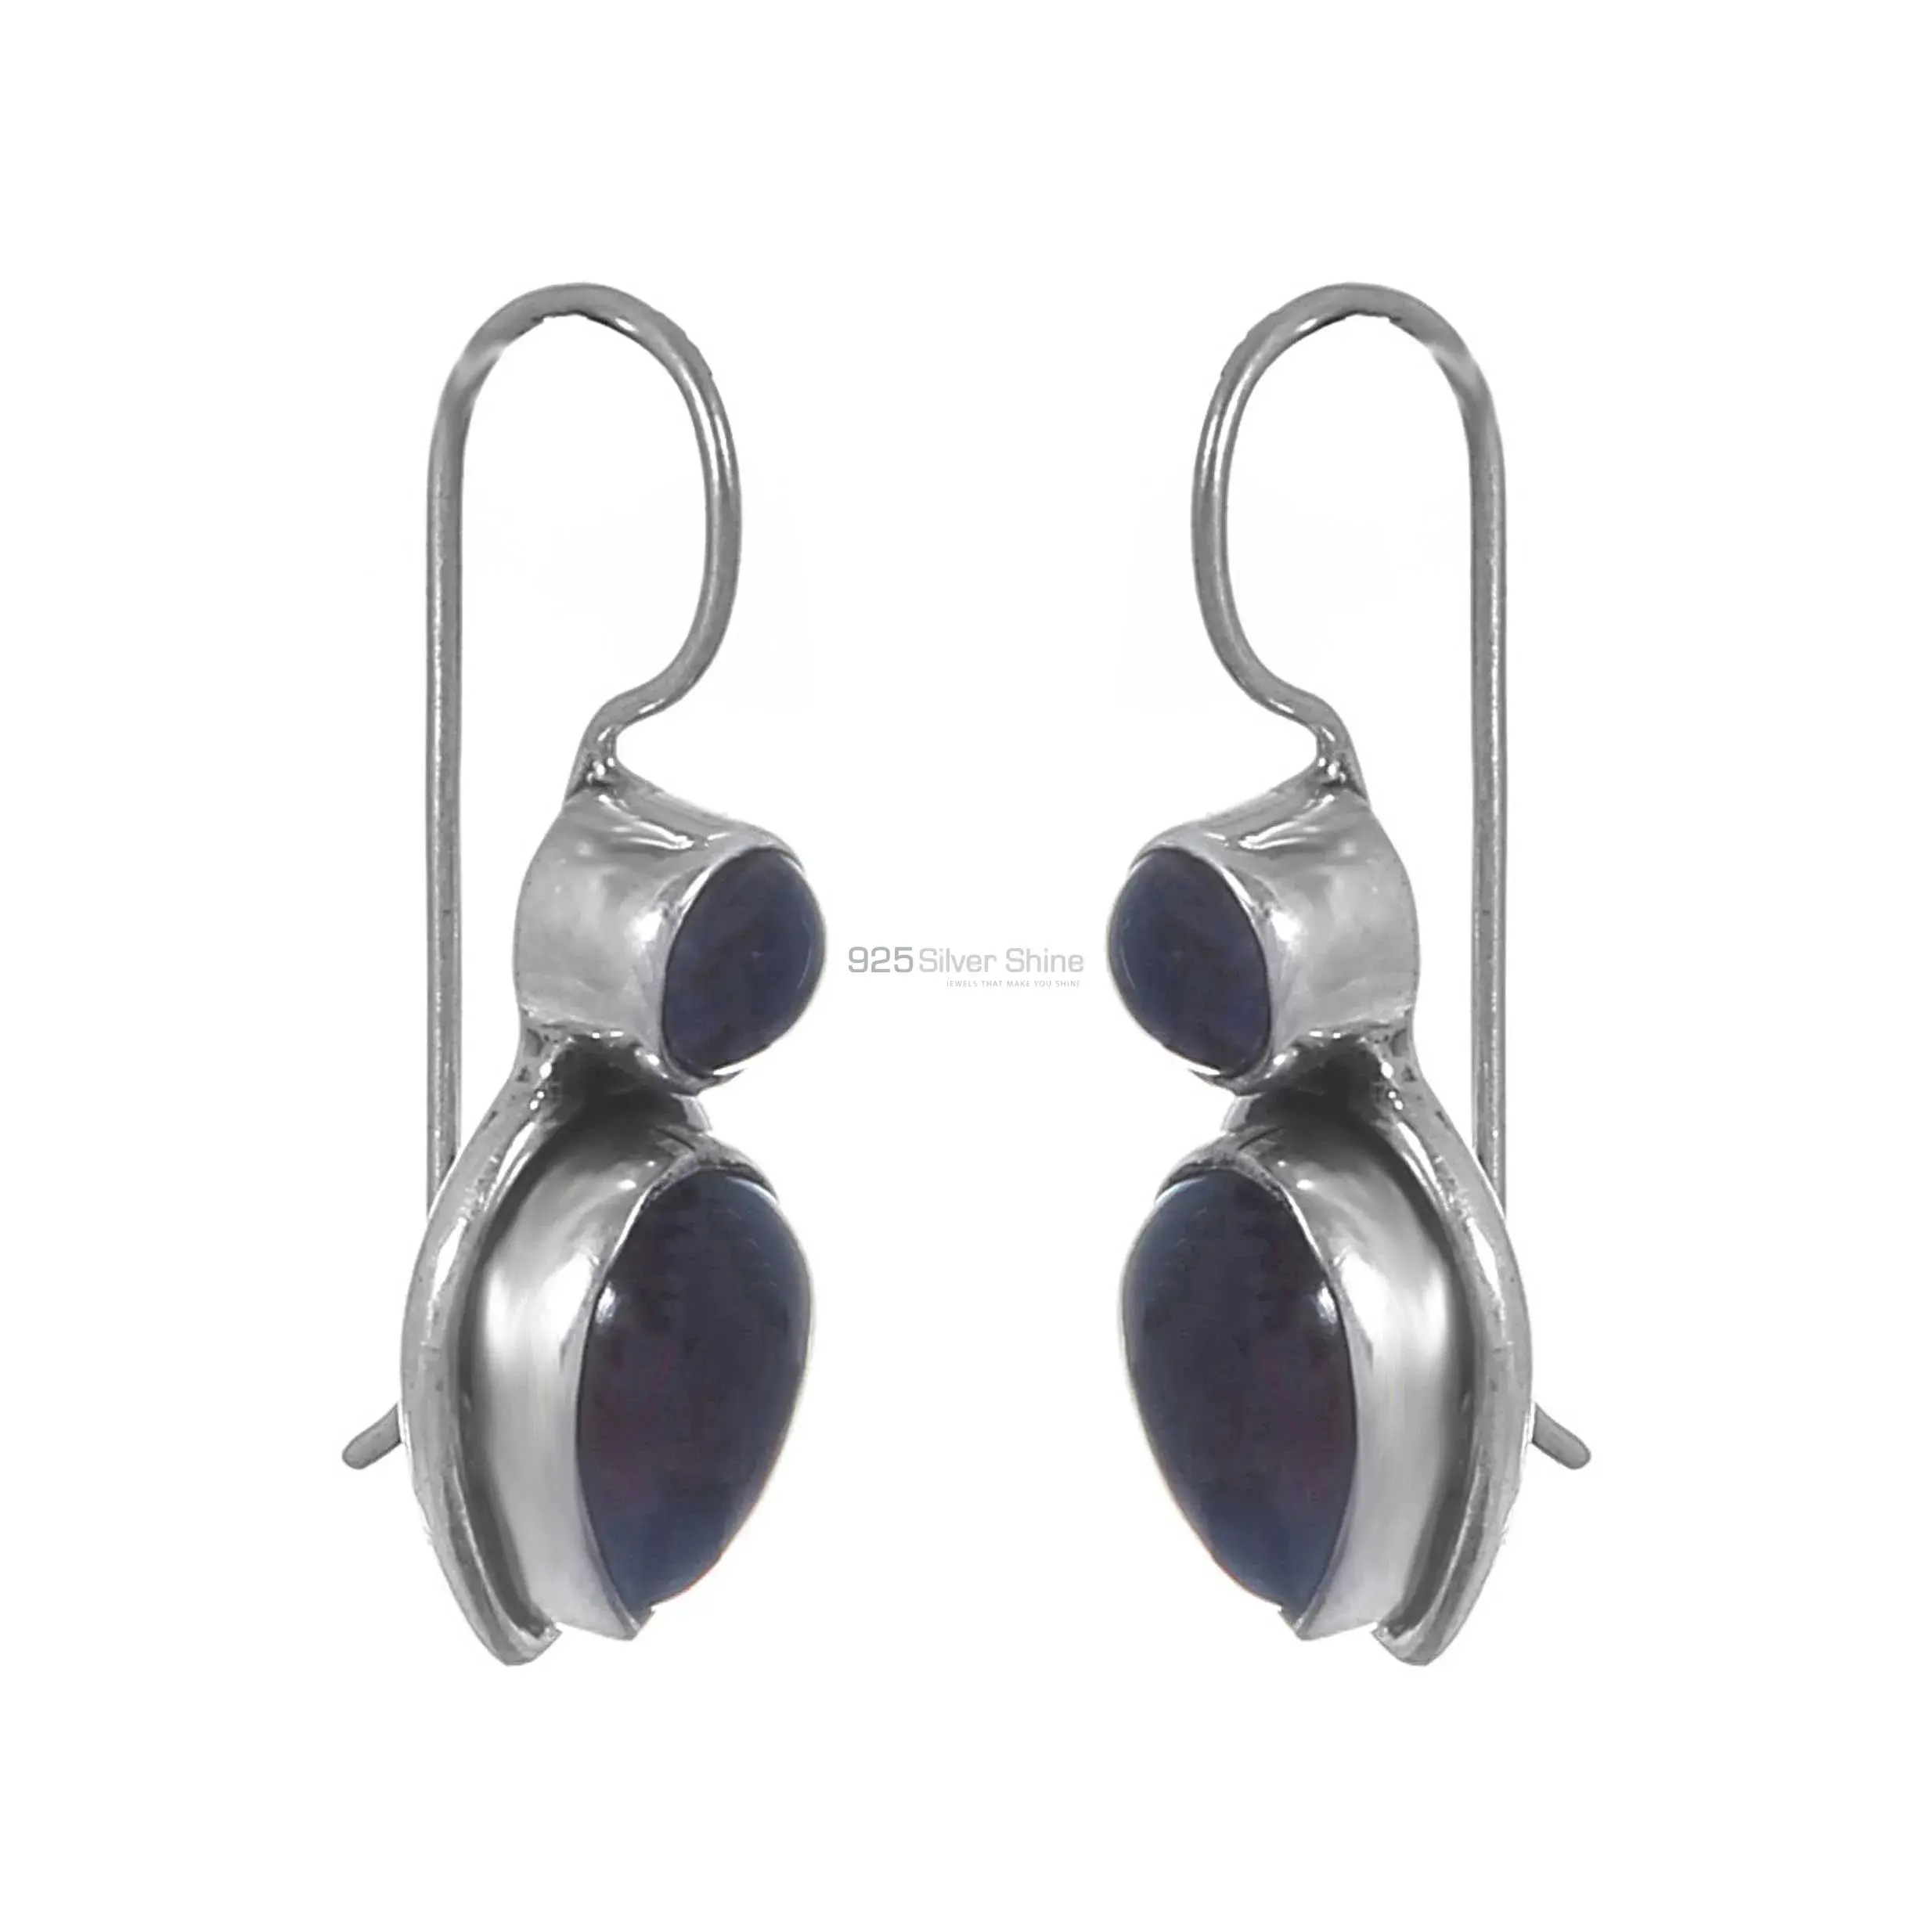 Wholesale Natural Semi Precious Gemstone Earring In Sterling Silver Jewelry 925SE202_0